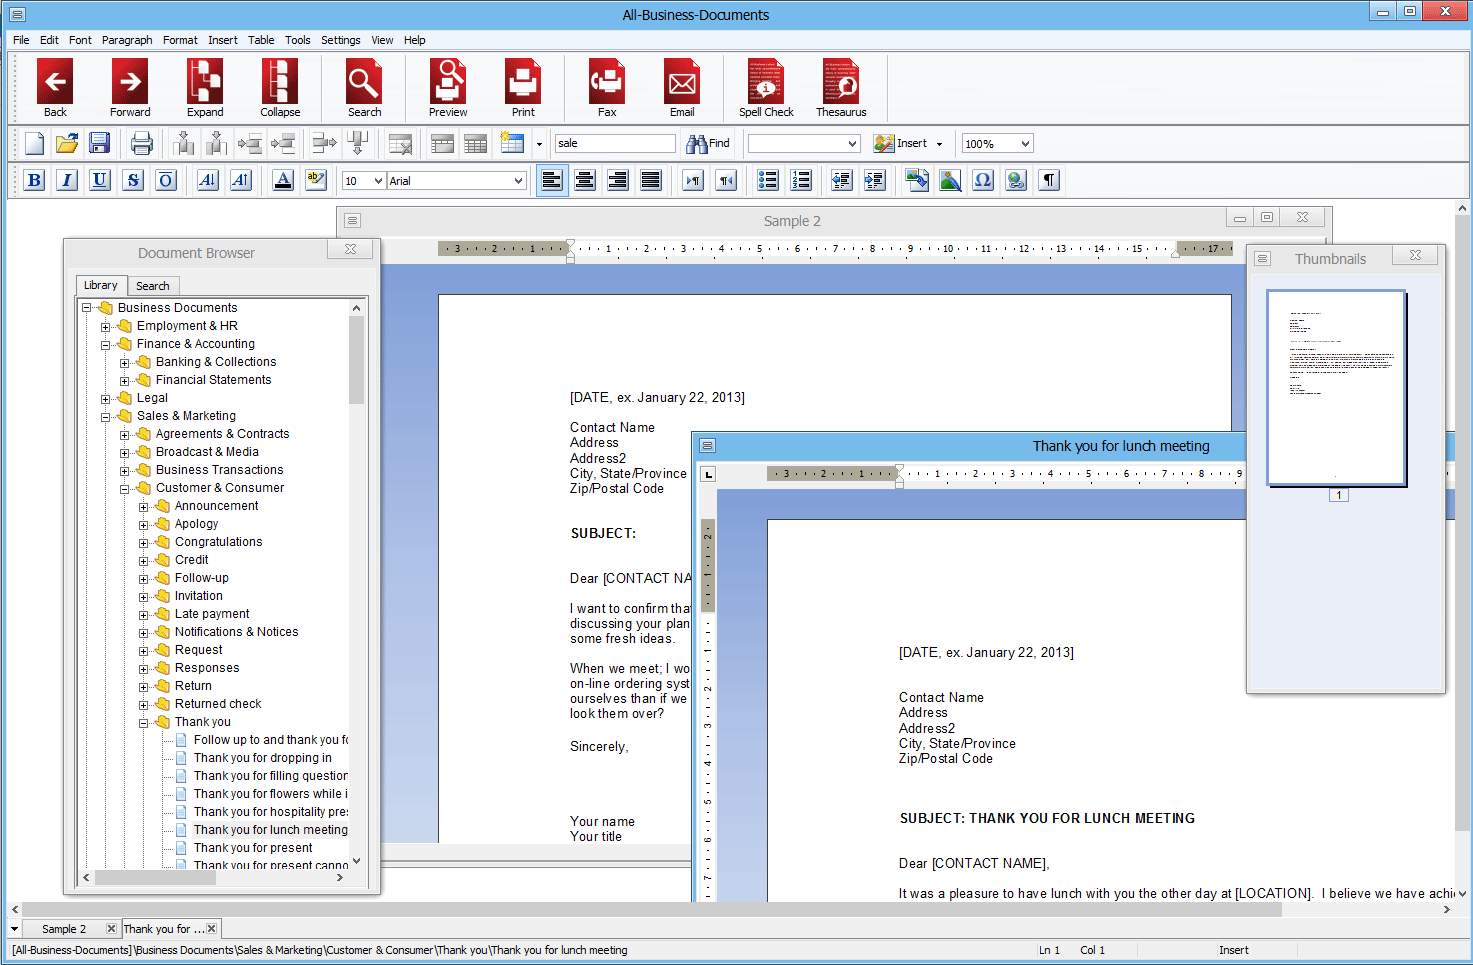 Windows 8 All-Business-Documents for Windows full